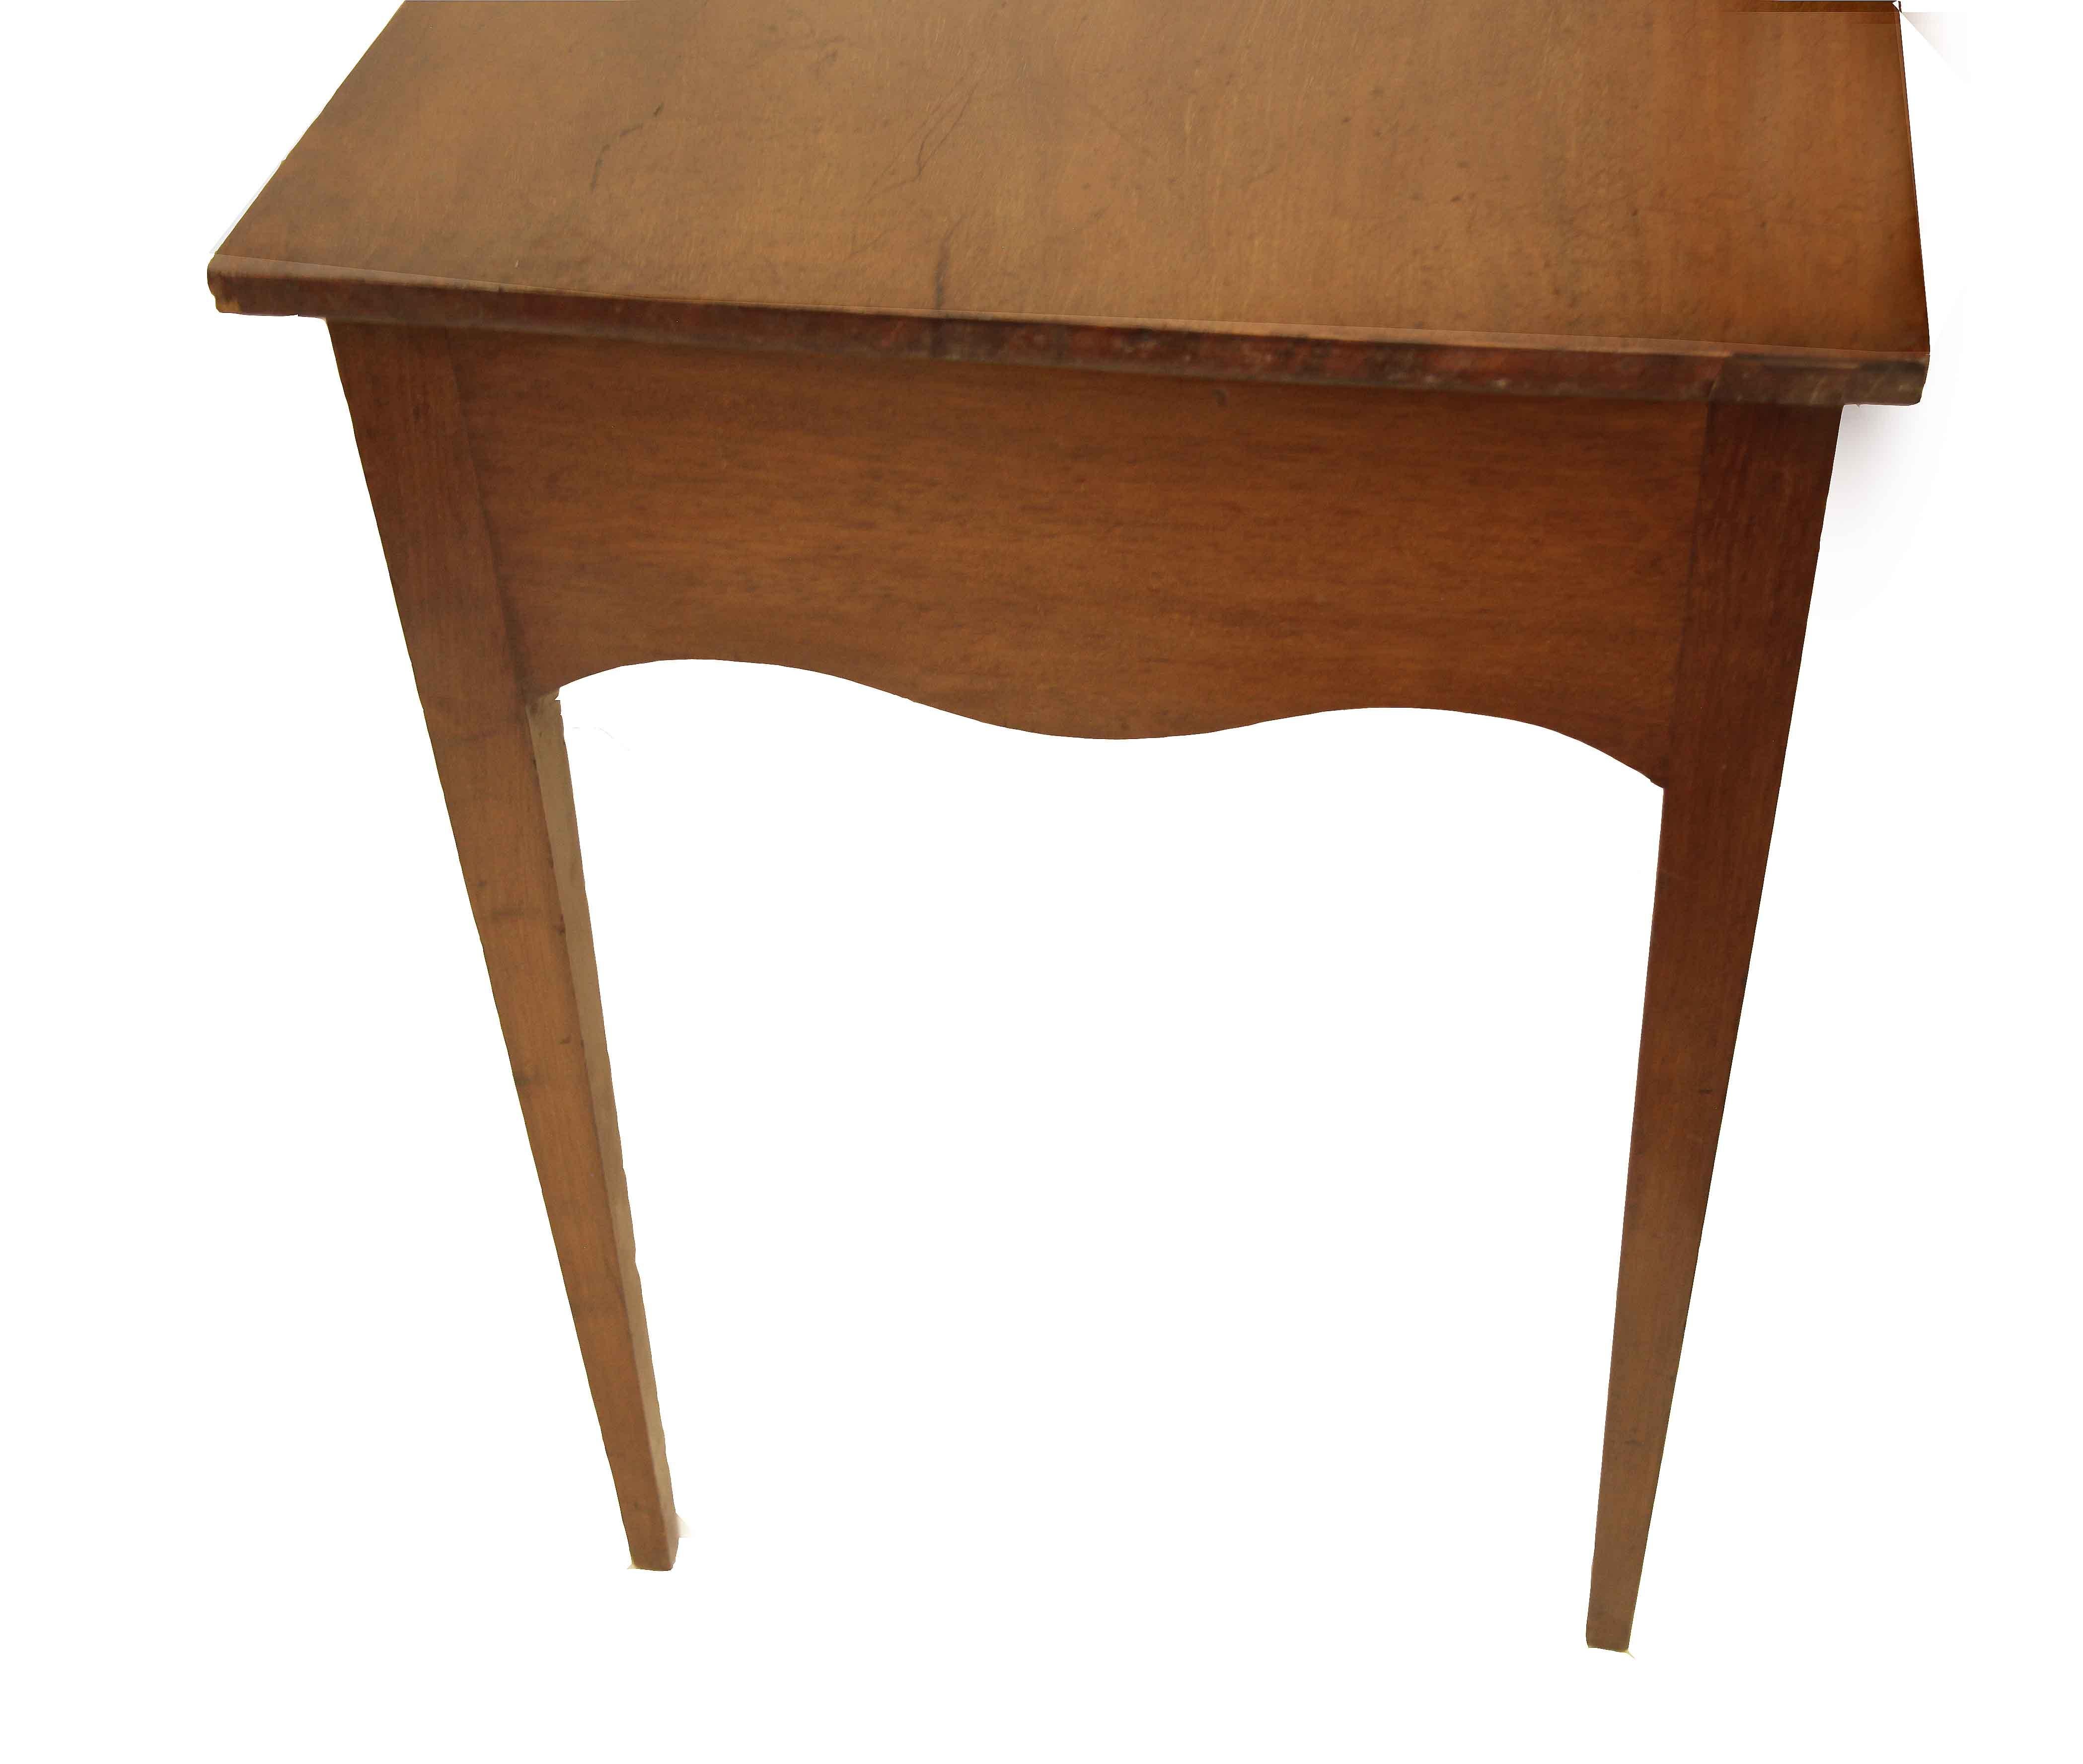 Hepplewhite one drawer side table, this early 19th century mahogany table has a beautiful faded one board top with excellent patina.  The single drawer has antique bail pulls with reticulated oval back plates ( these are not original ), the edge of